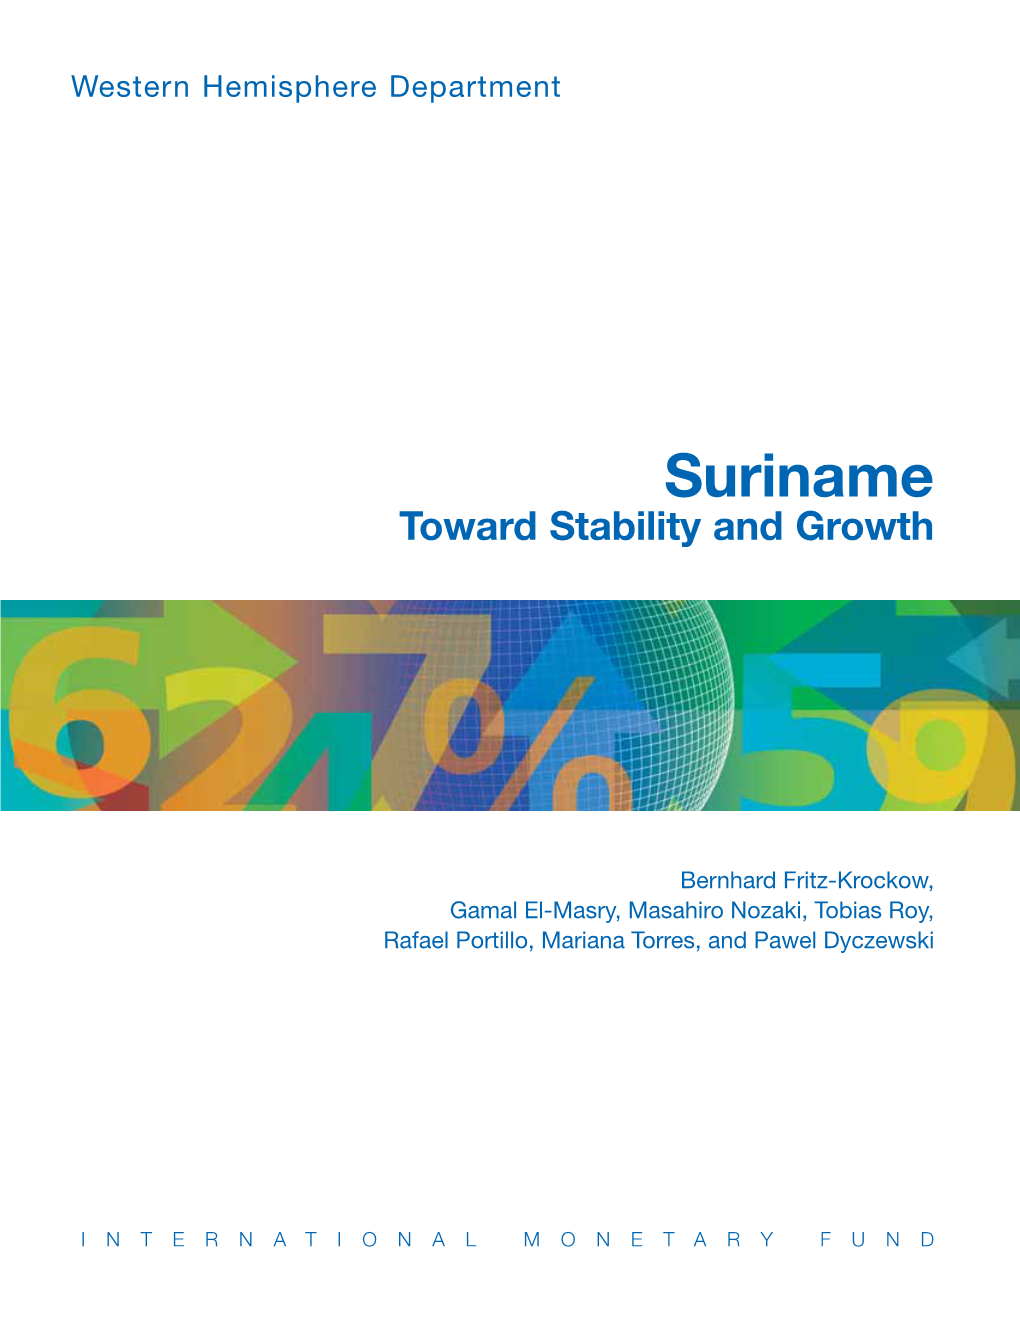 Suriname Toward Stability and Growth